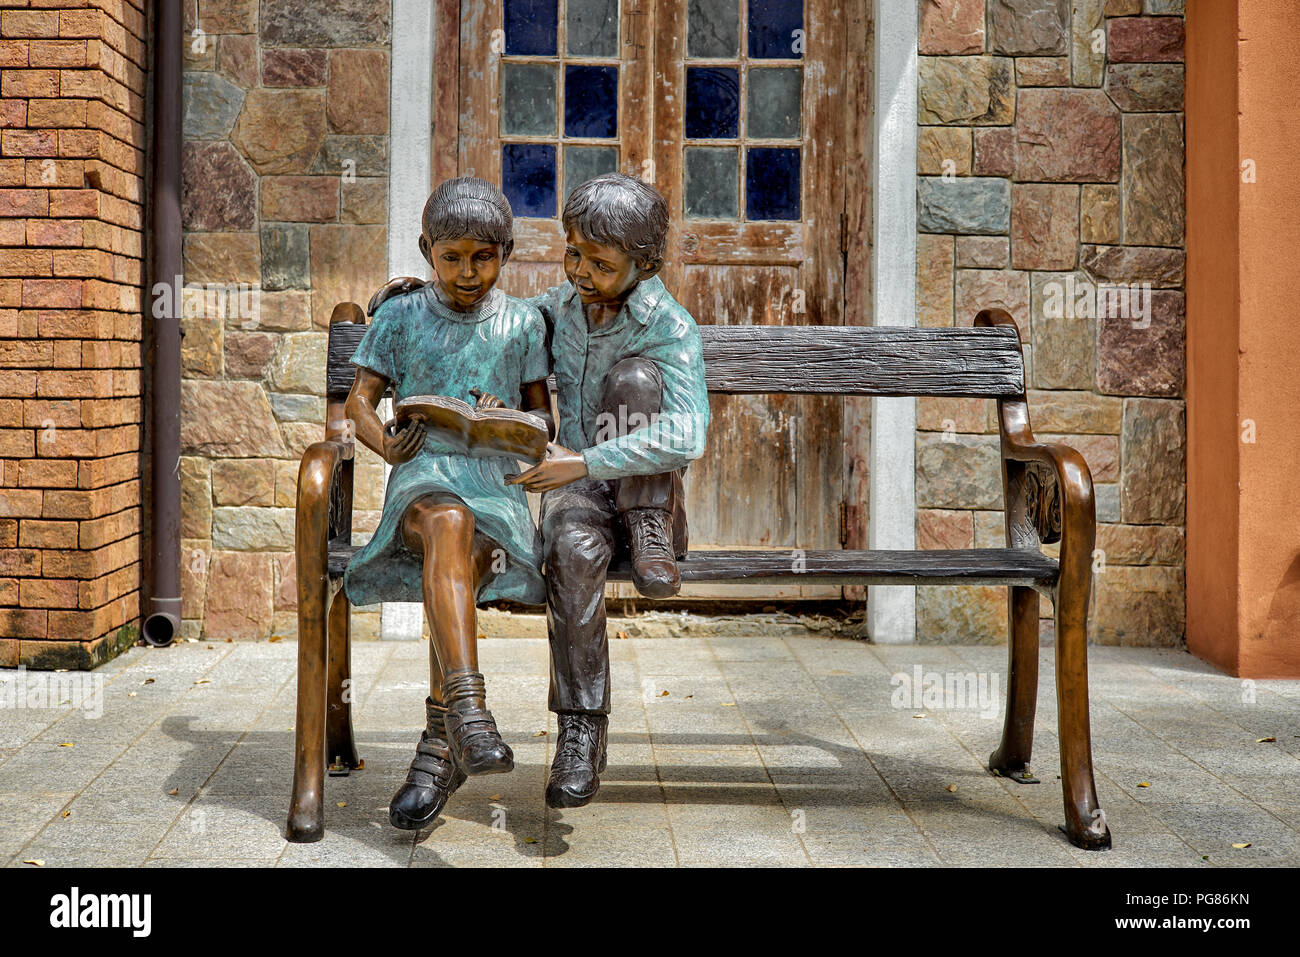 Statue boy and girl sitting on a bench, reading book, together. togetherness Stock Photo